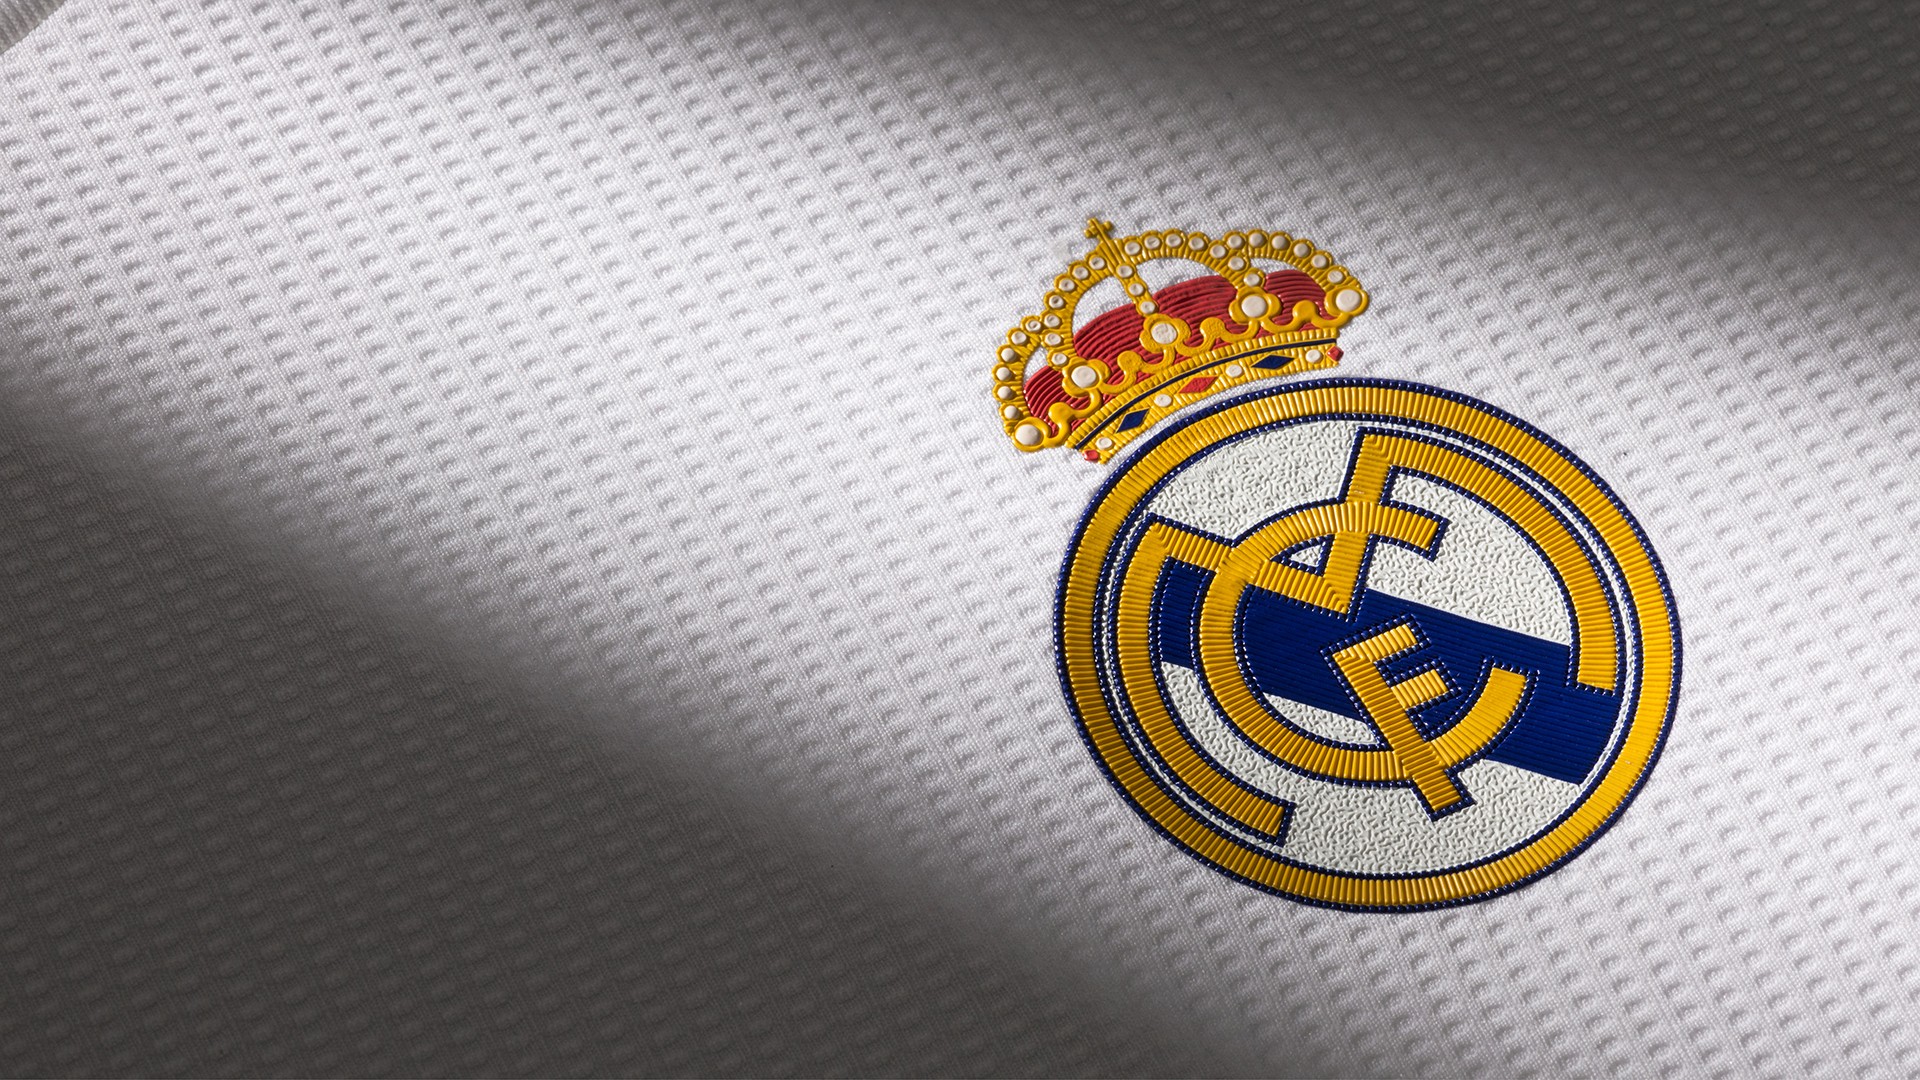 Real Madrid CF Wallpaper HD With Resolution 1920X1080 pixel. You can make this wallpaper for your Mac or Windows Desktop Background, iPhone, Android or Tablet and another Smartphone device for free